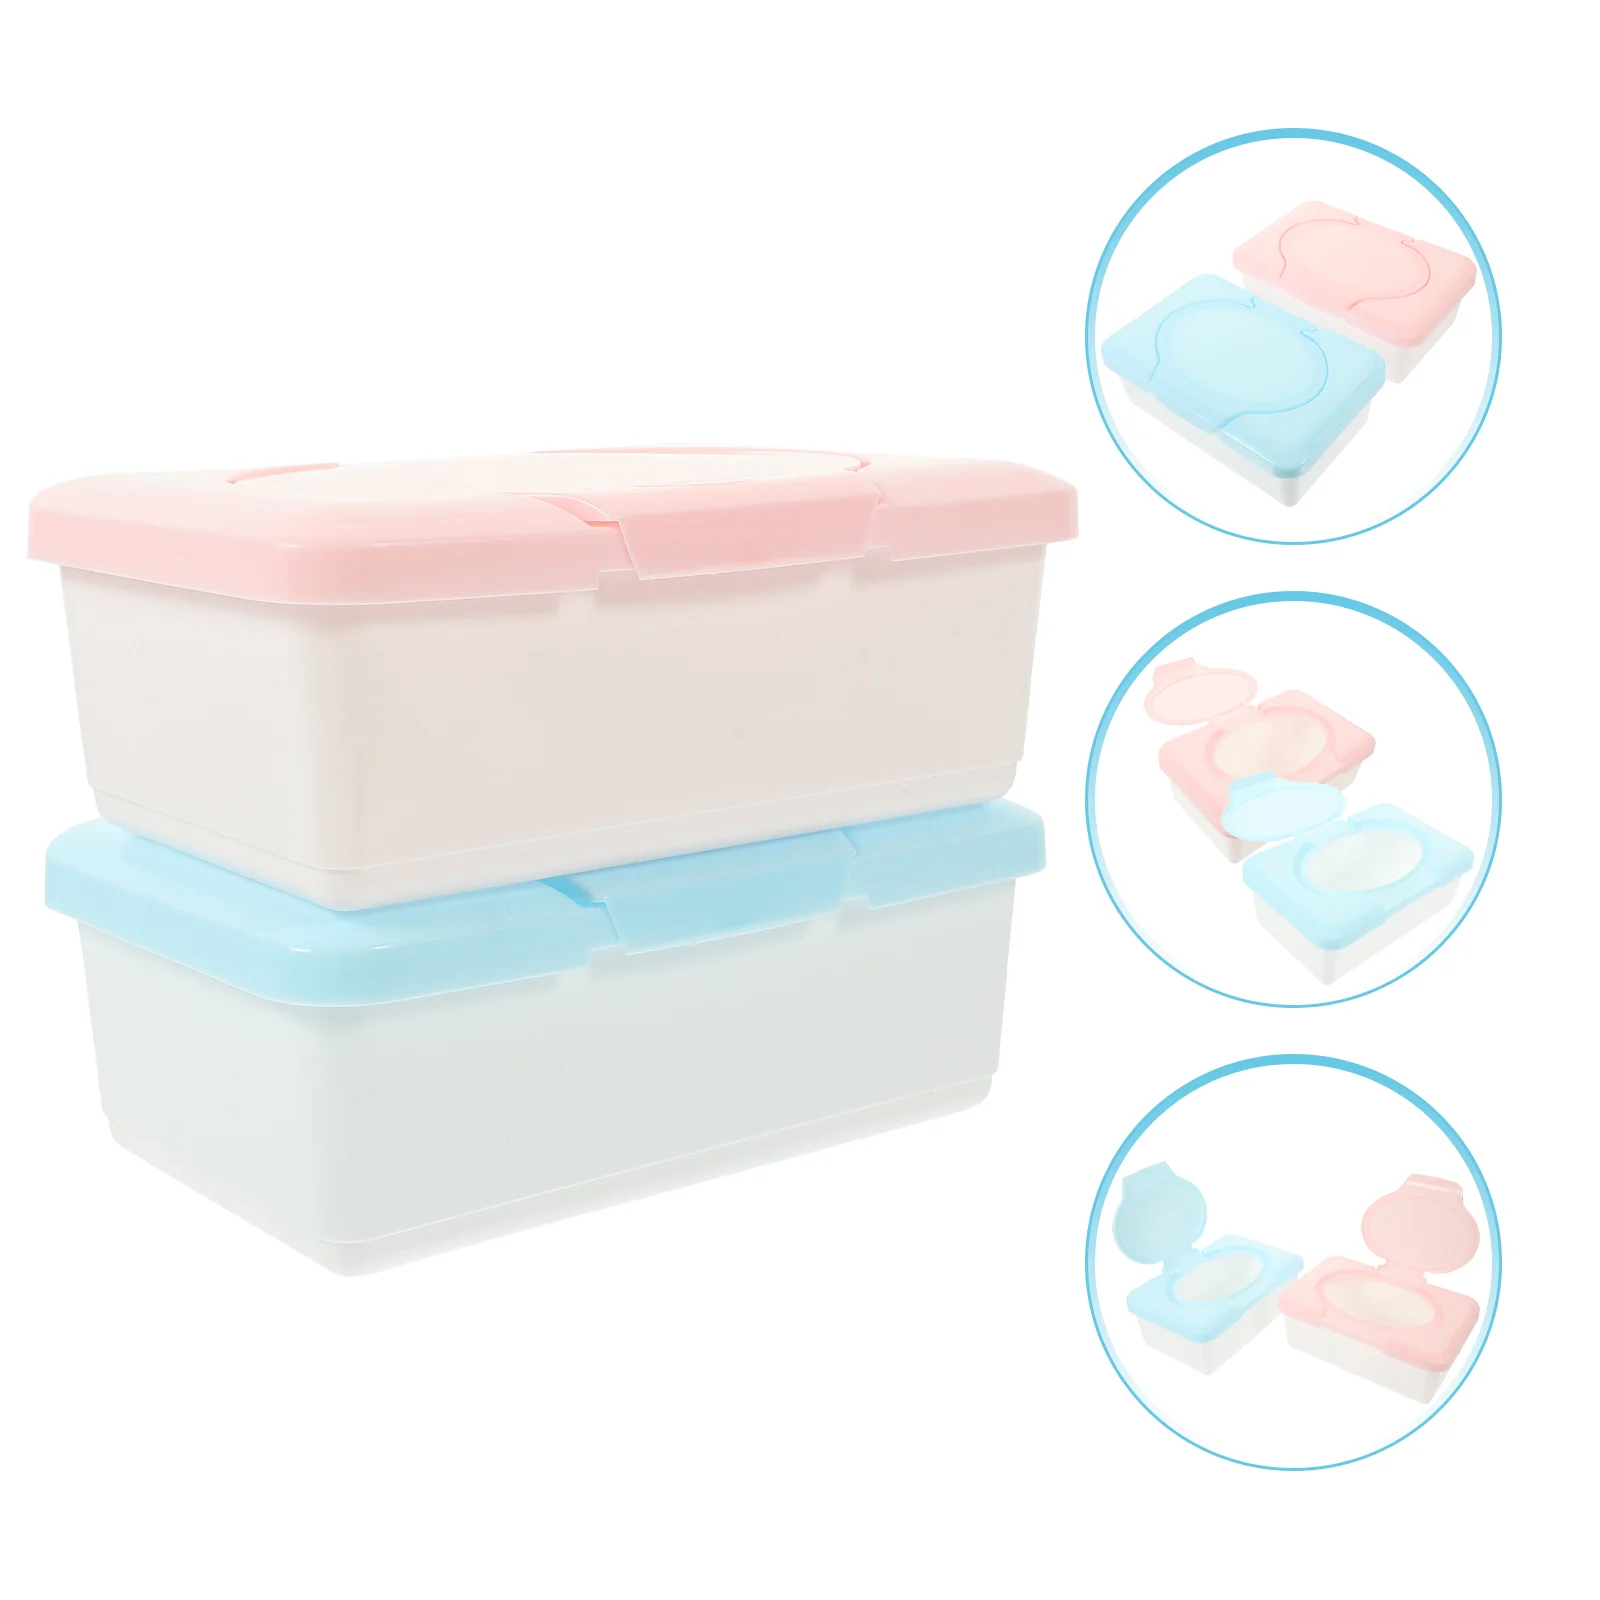 

Fomiyes Wipes Box Babywipe Rags Travel Wipes Holder Refillable Wipe Container Bathroom Wipe Case Bracket